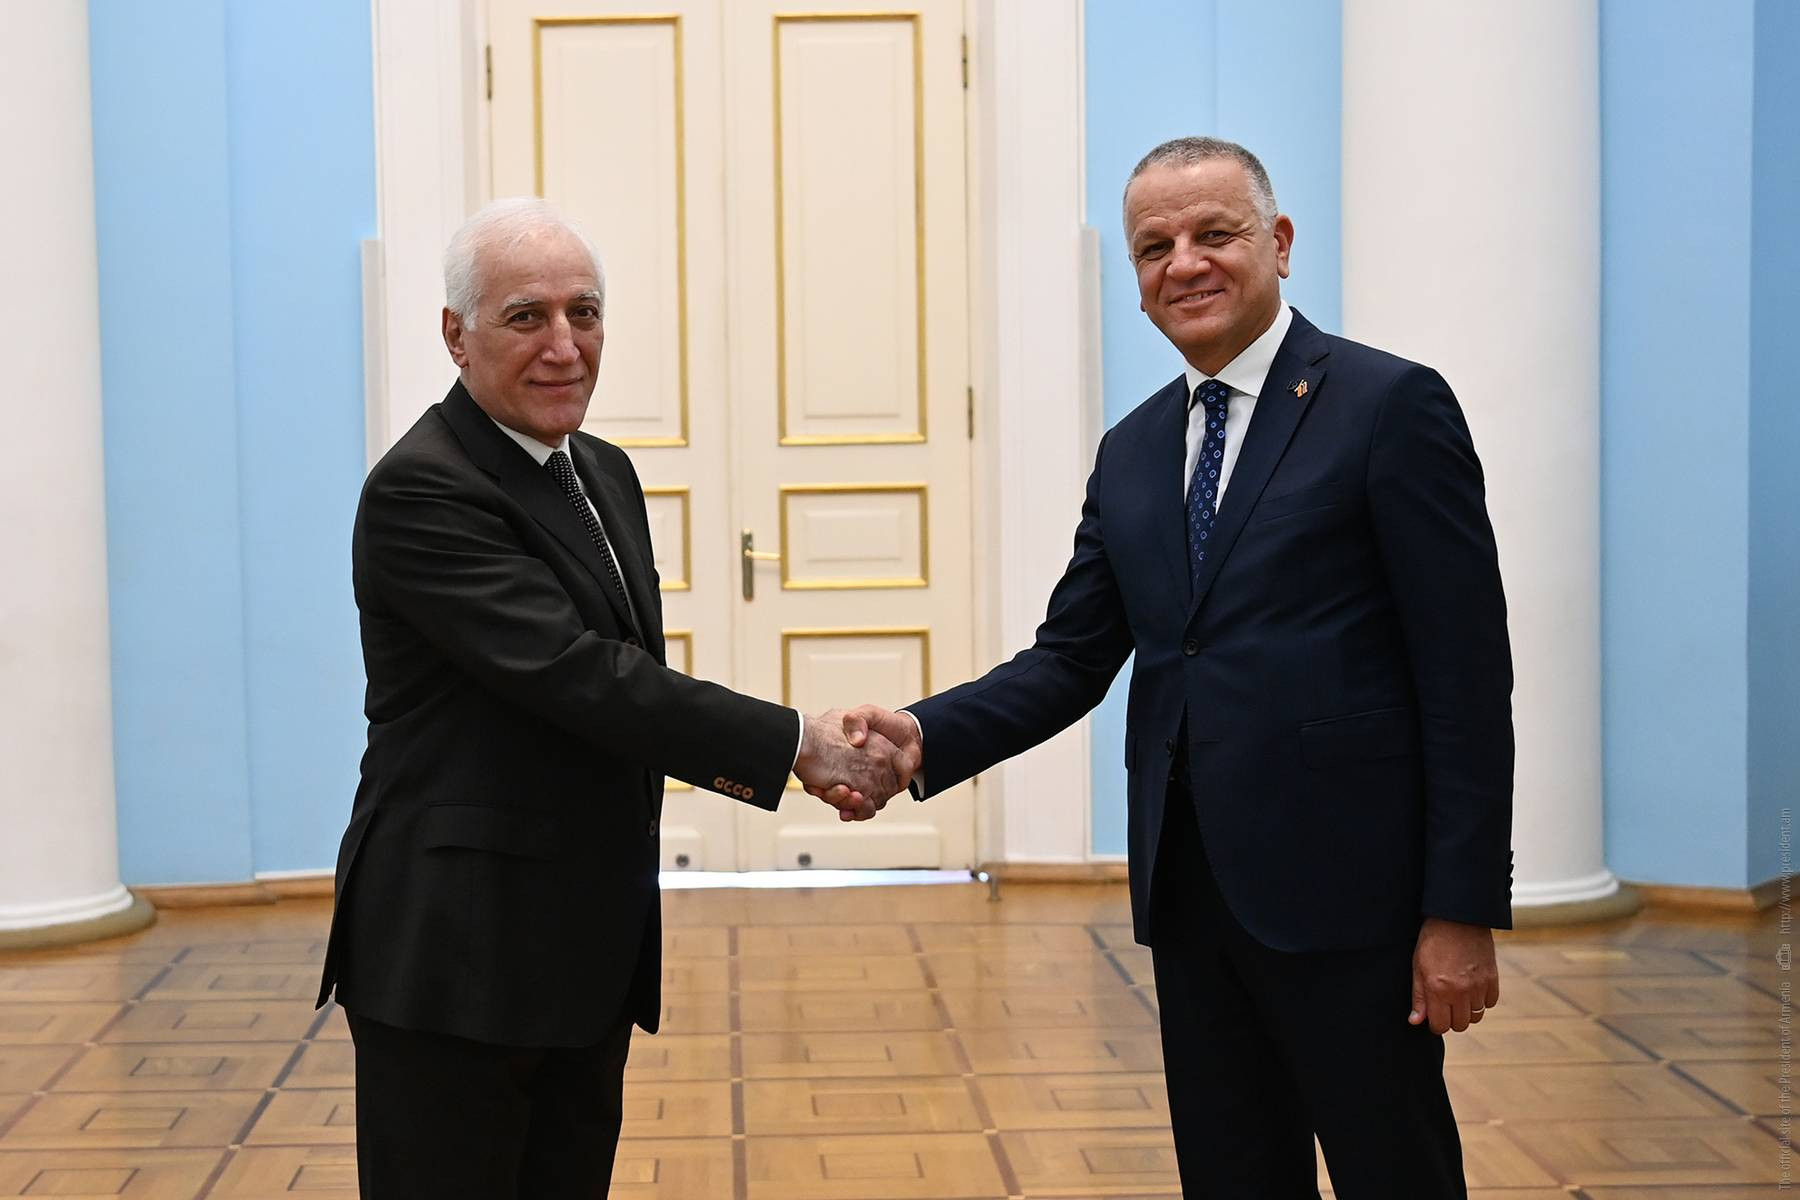 Vassilis Maragos, Ambassador Extraordinary and Plenipotentiary, Head of the Delegation of the European Union to Armenia, presented his credentials to President Vahagn Khachaturyan